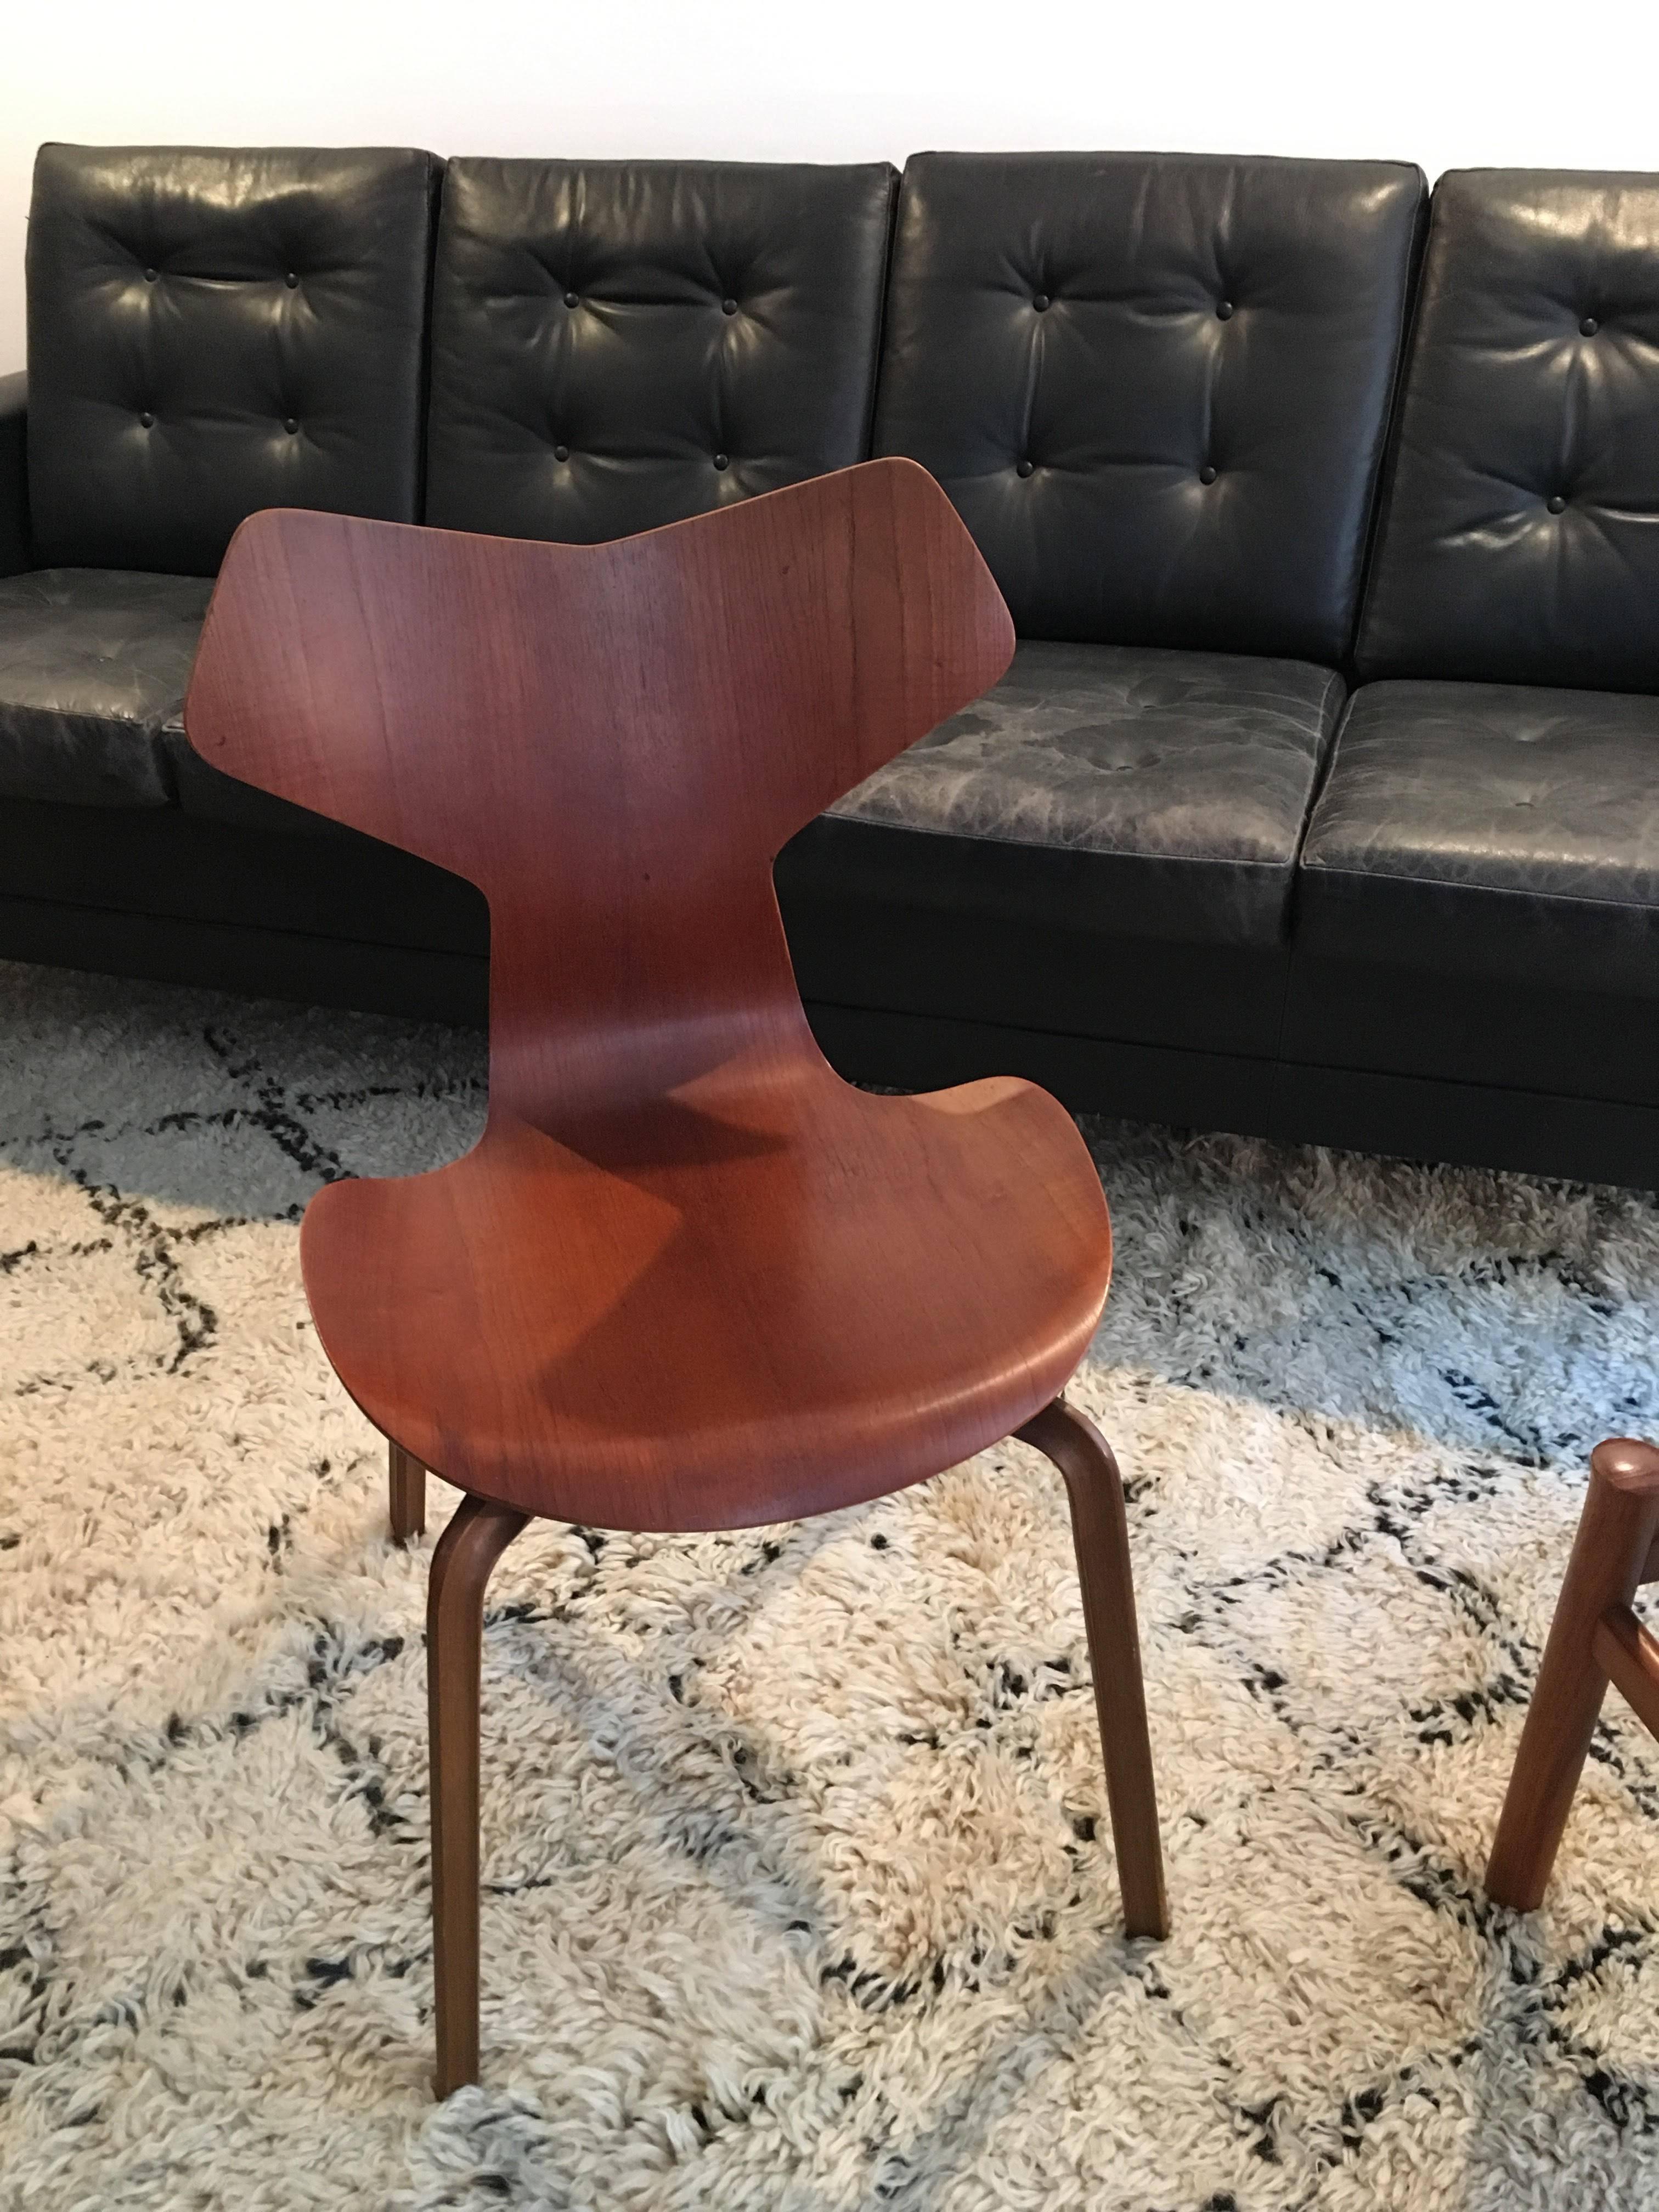 Rare First Edition Grand Prix Chair by Arne Jacobsen for Fritz Hansen For Sale 3